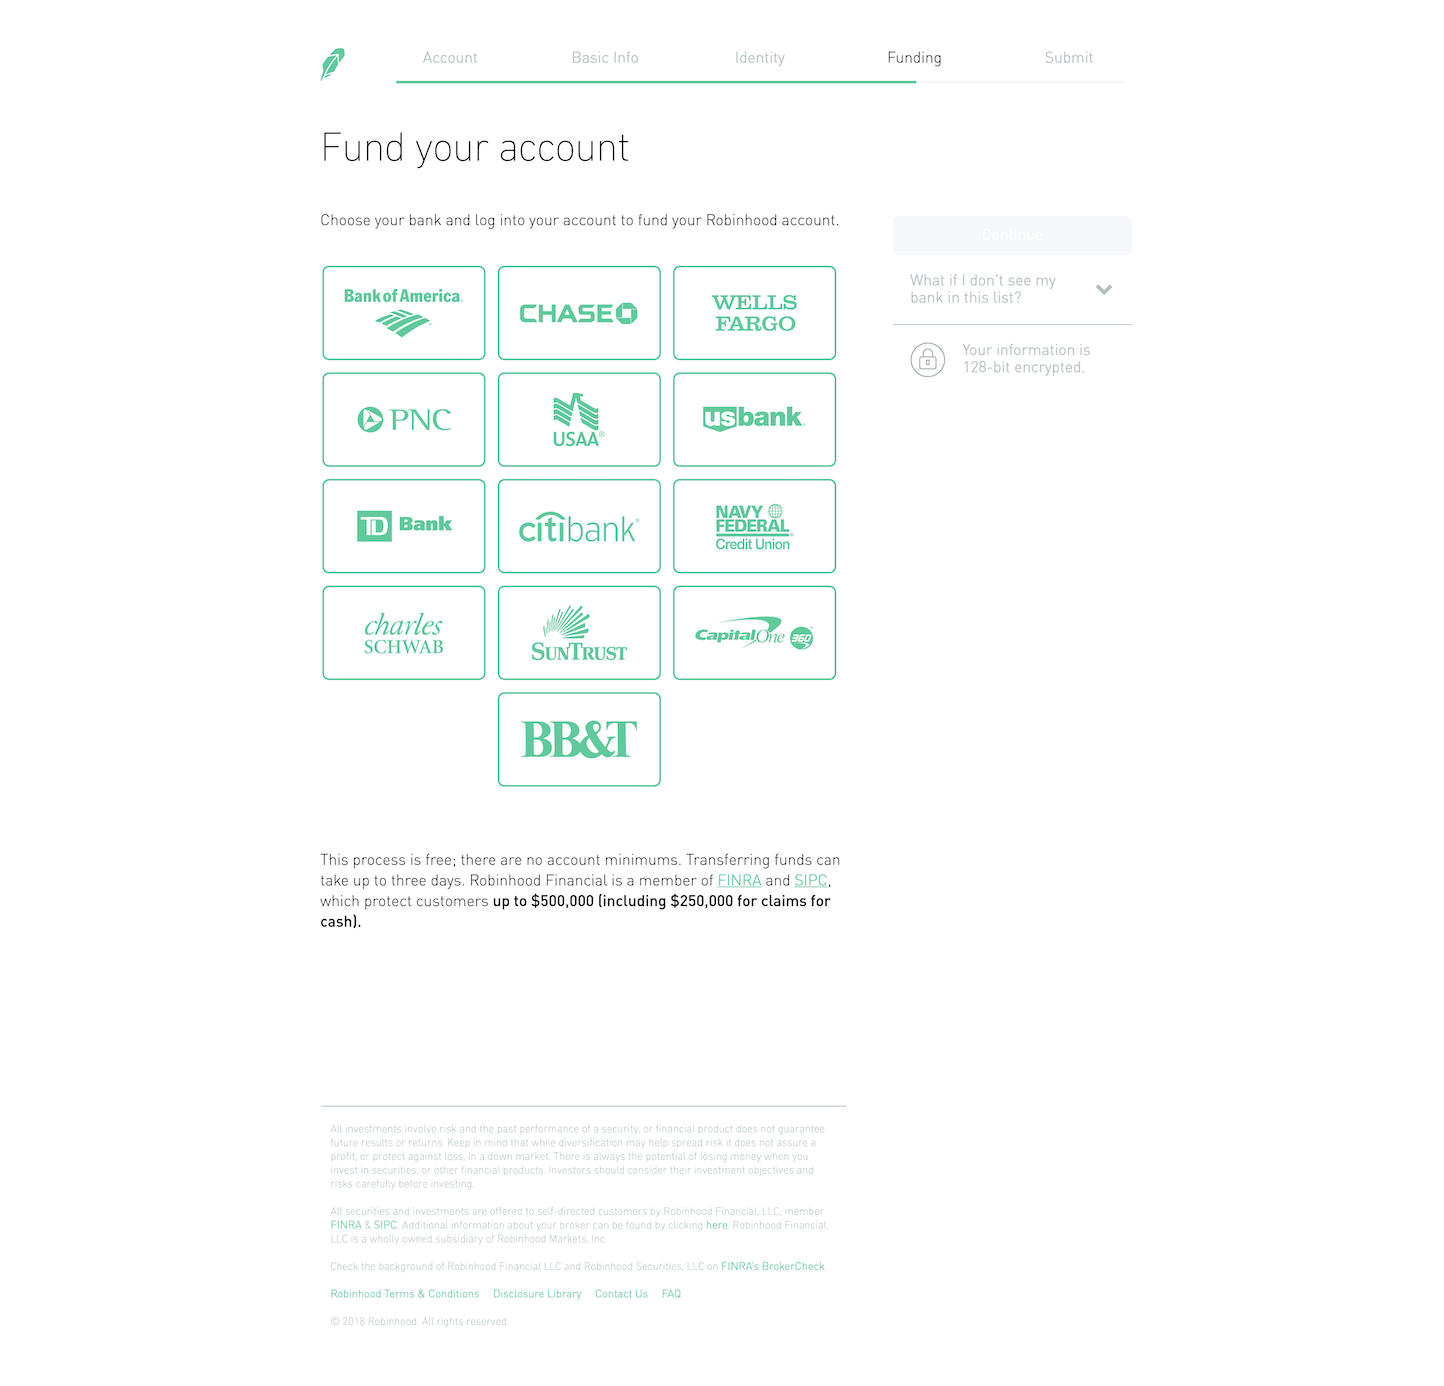 Screenshot of the Sign Up - Step 6 page from the Robinhood website.